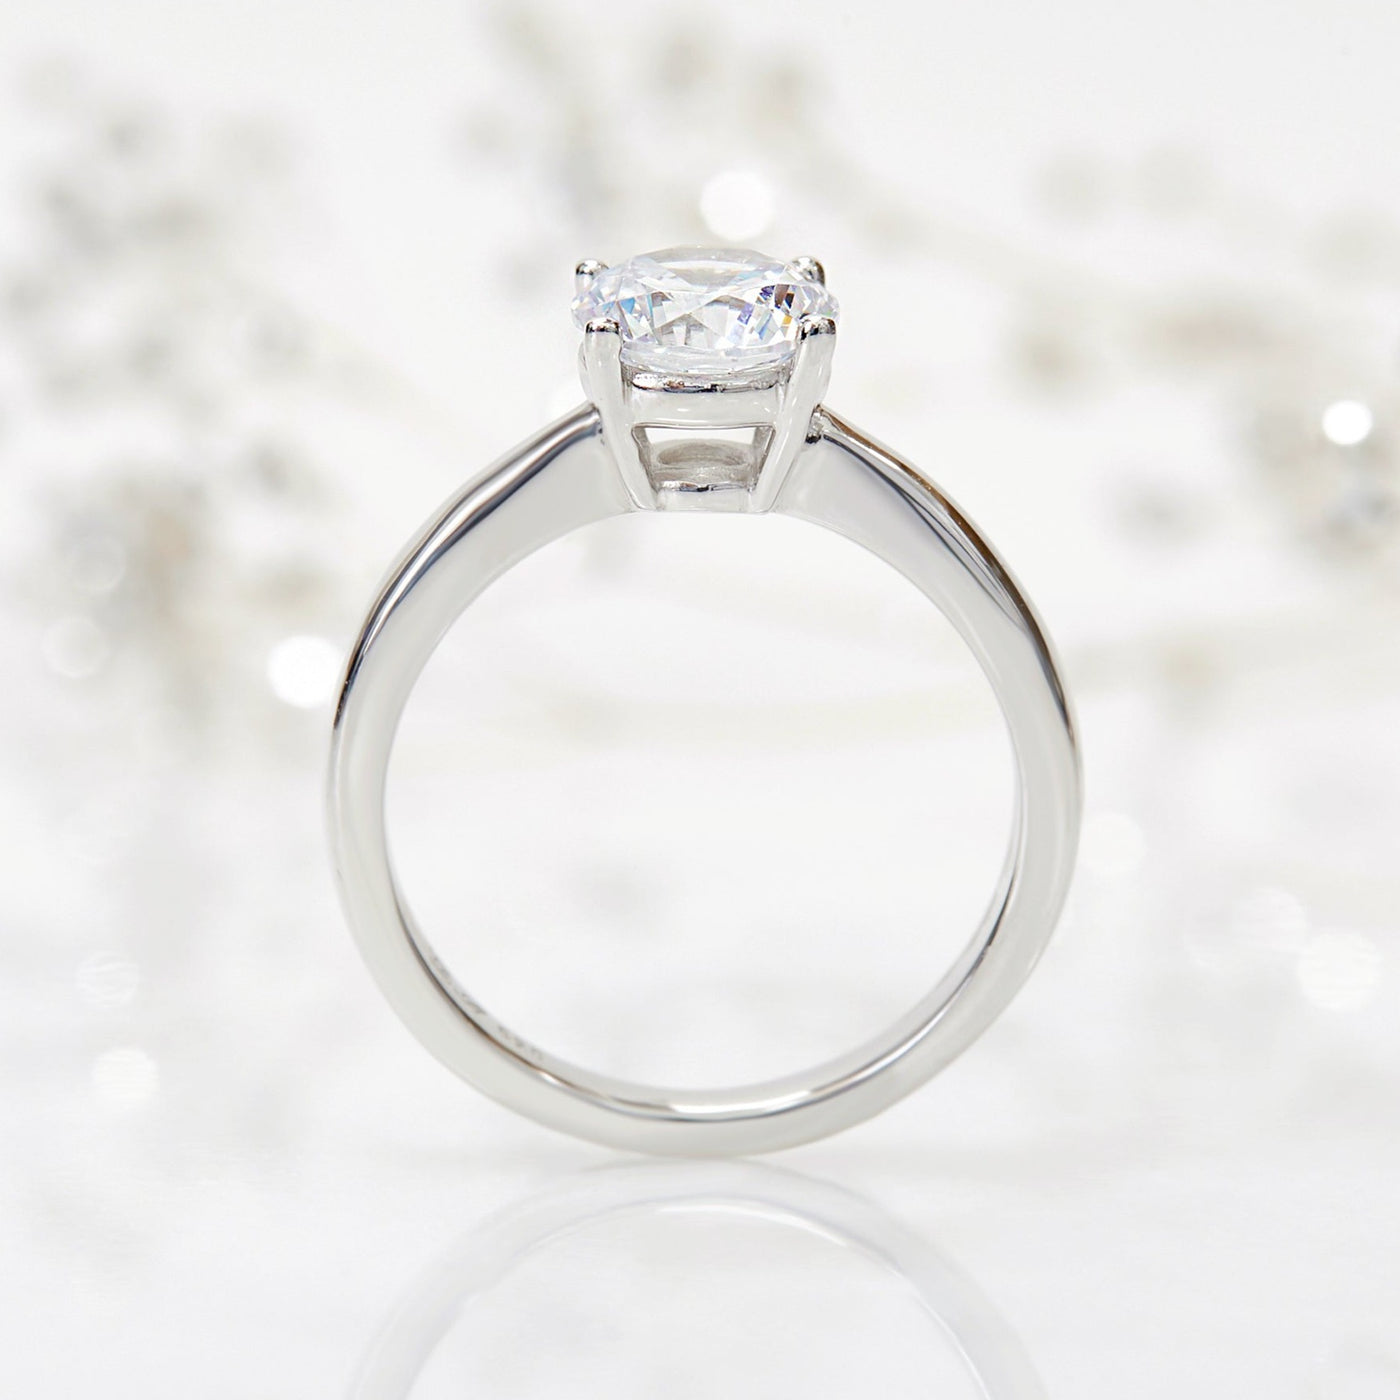 Lustrous Tapered Solitaire Ring. 1.2 CT